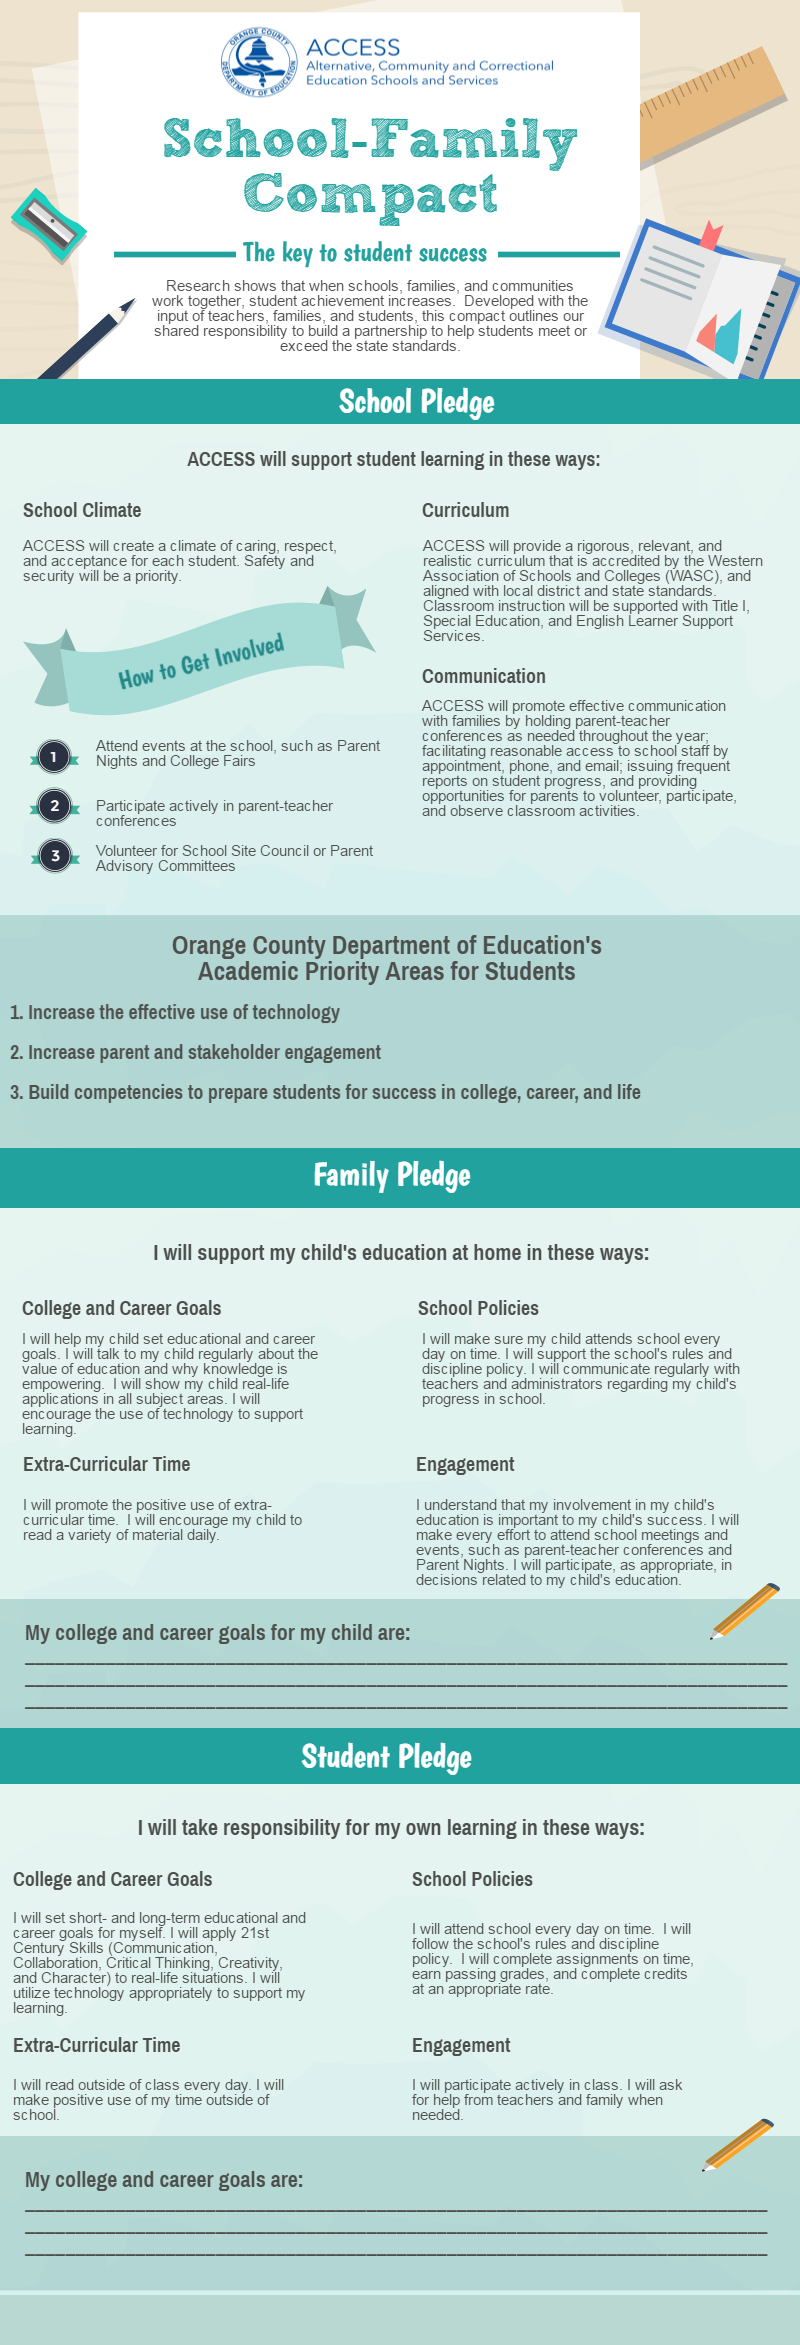 Infographic of School-Family Compact